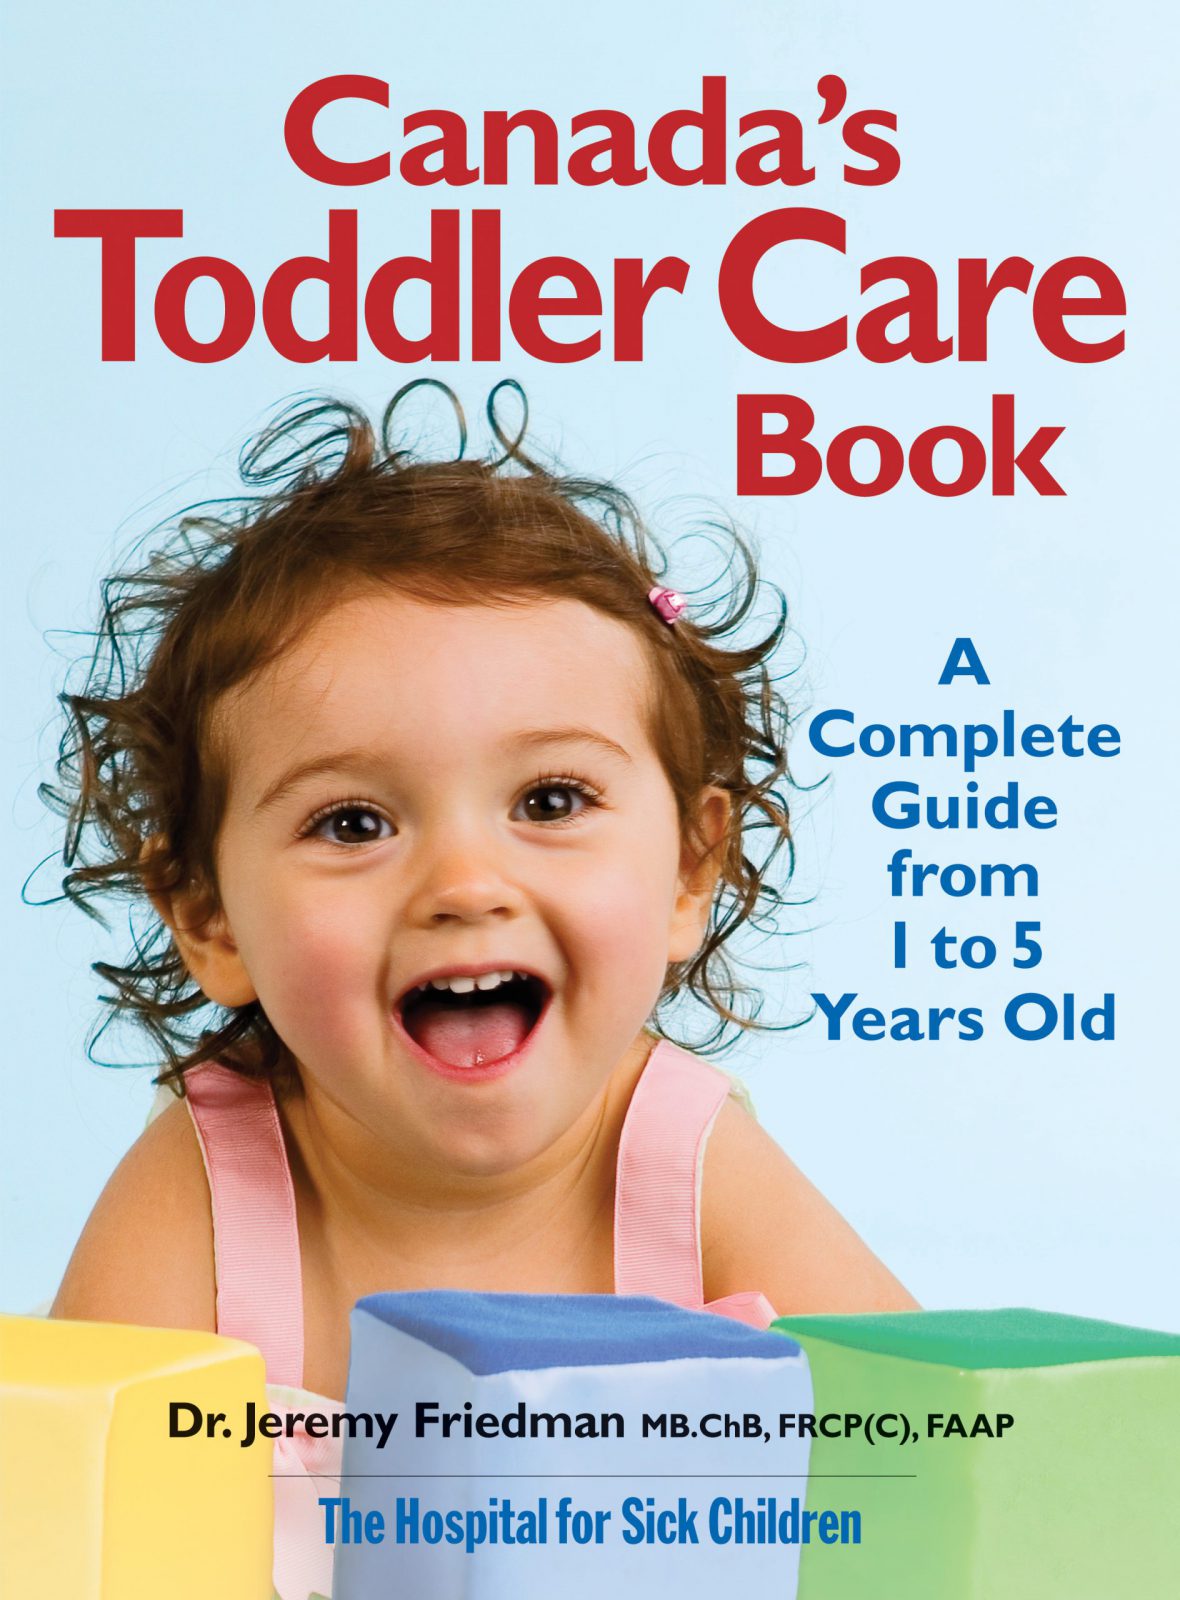 The Toddler Care Book